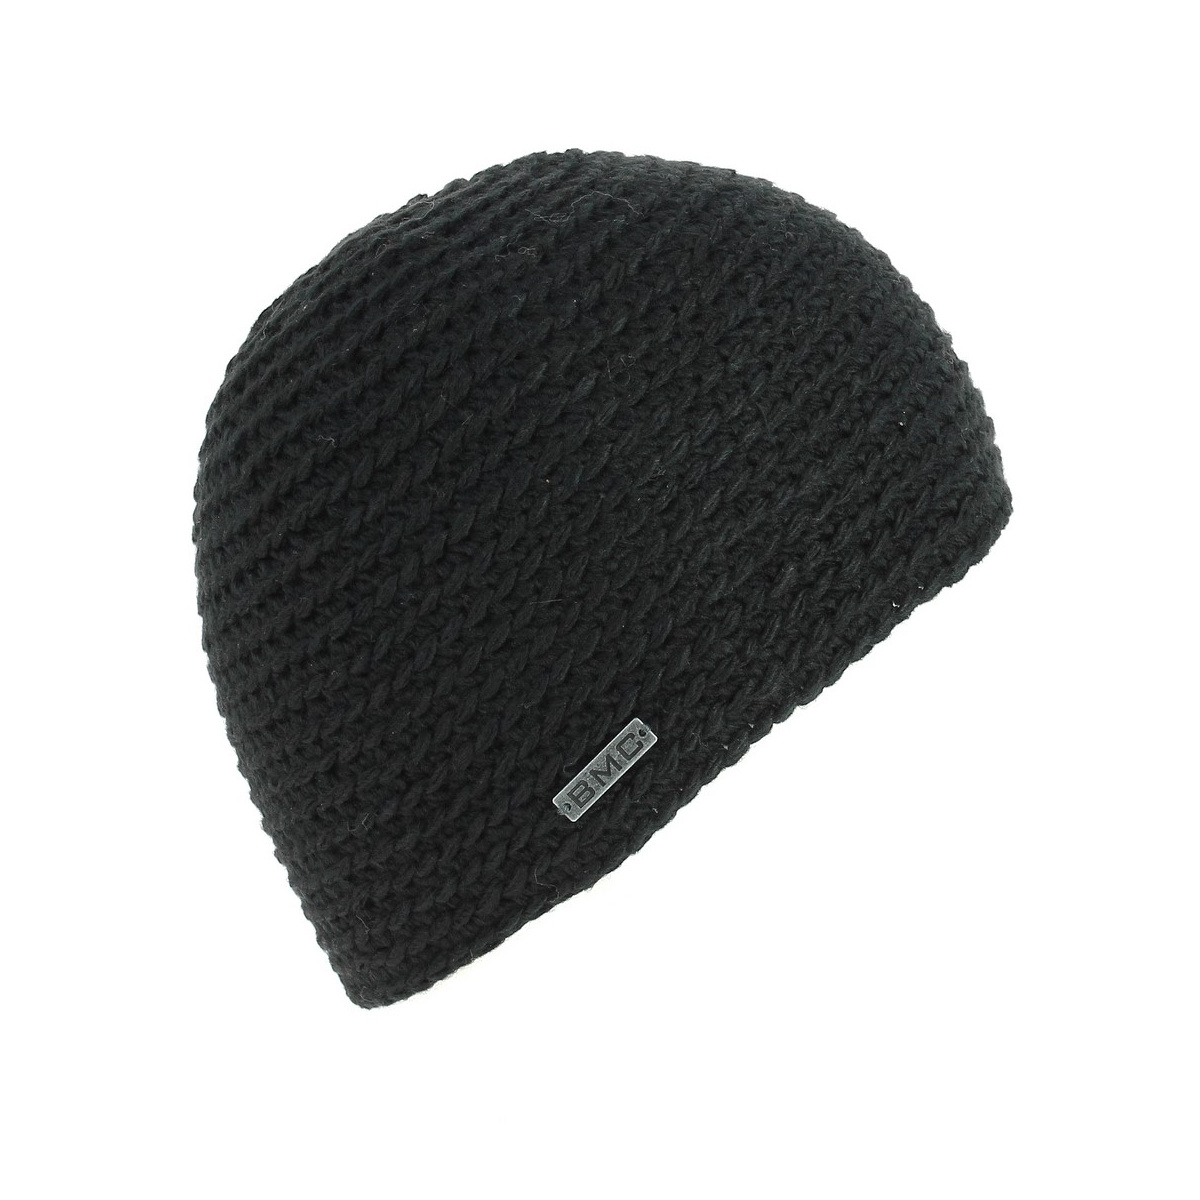 Knit cap Reference : 11545 | Chapellerie Traclet